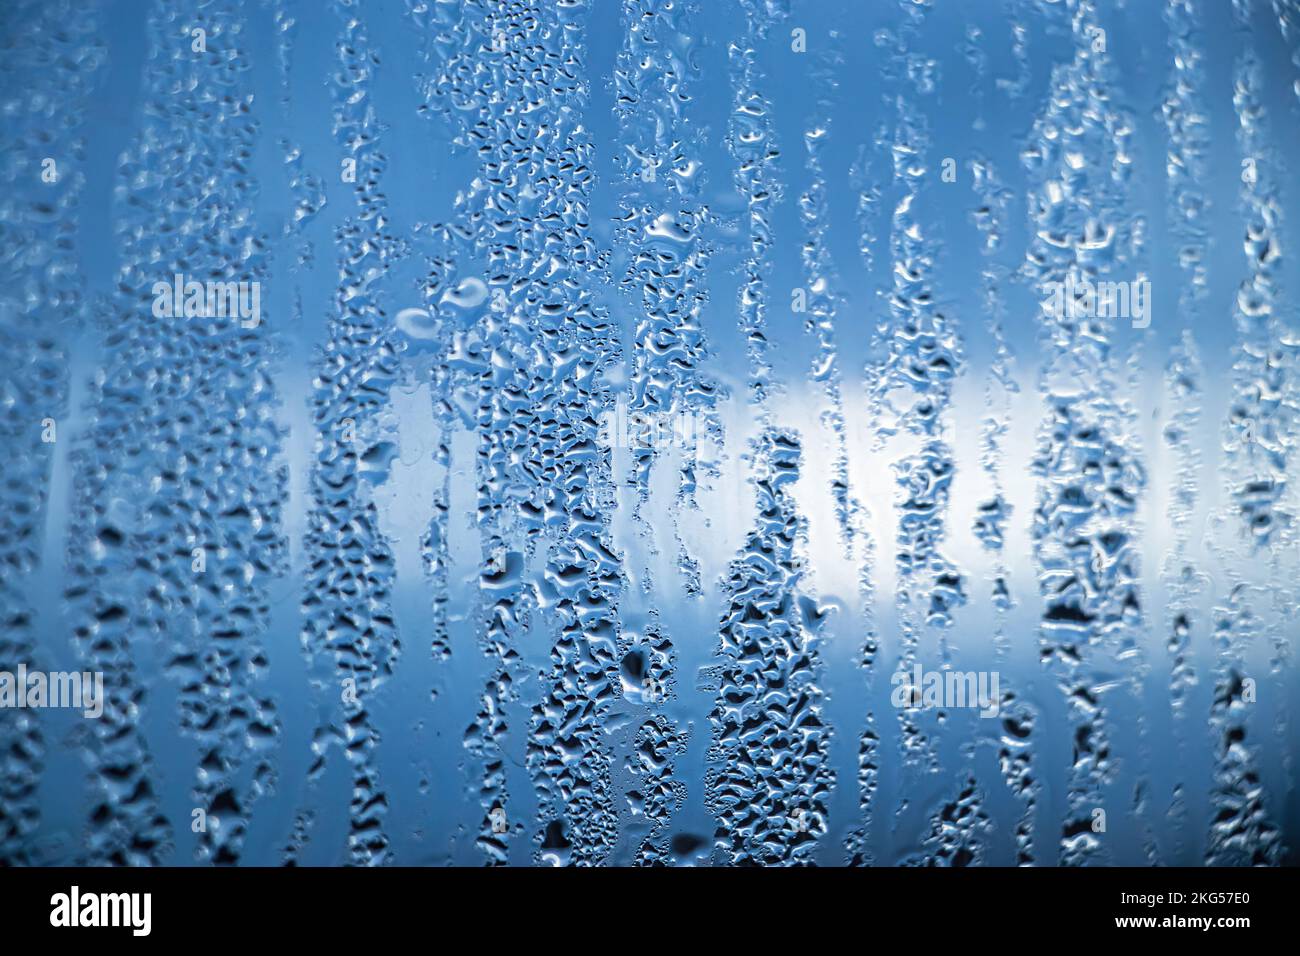 Texture of misted glass in autumn. Drops of water on window in rainy weather. Abstract background. Stock Photo